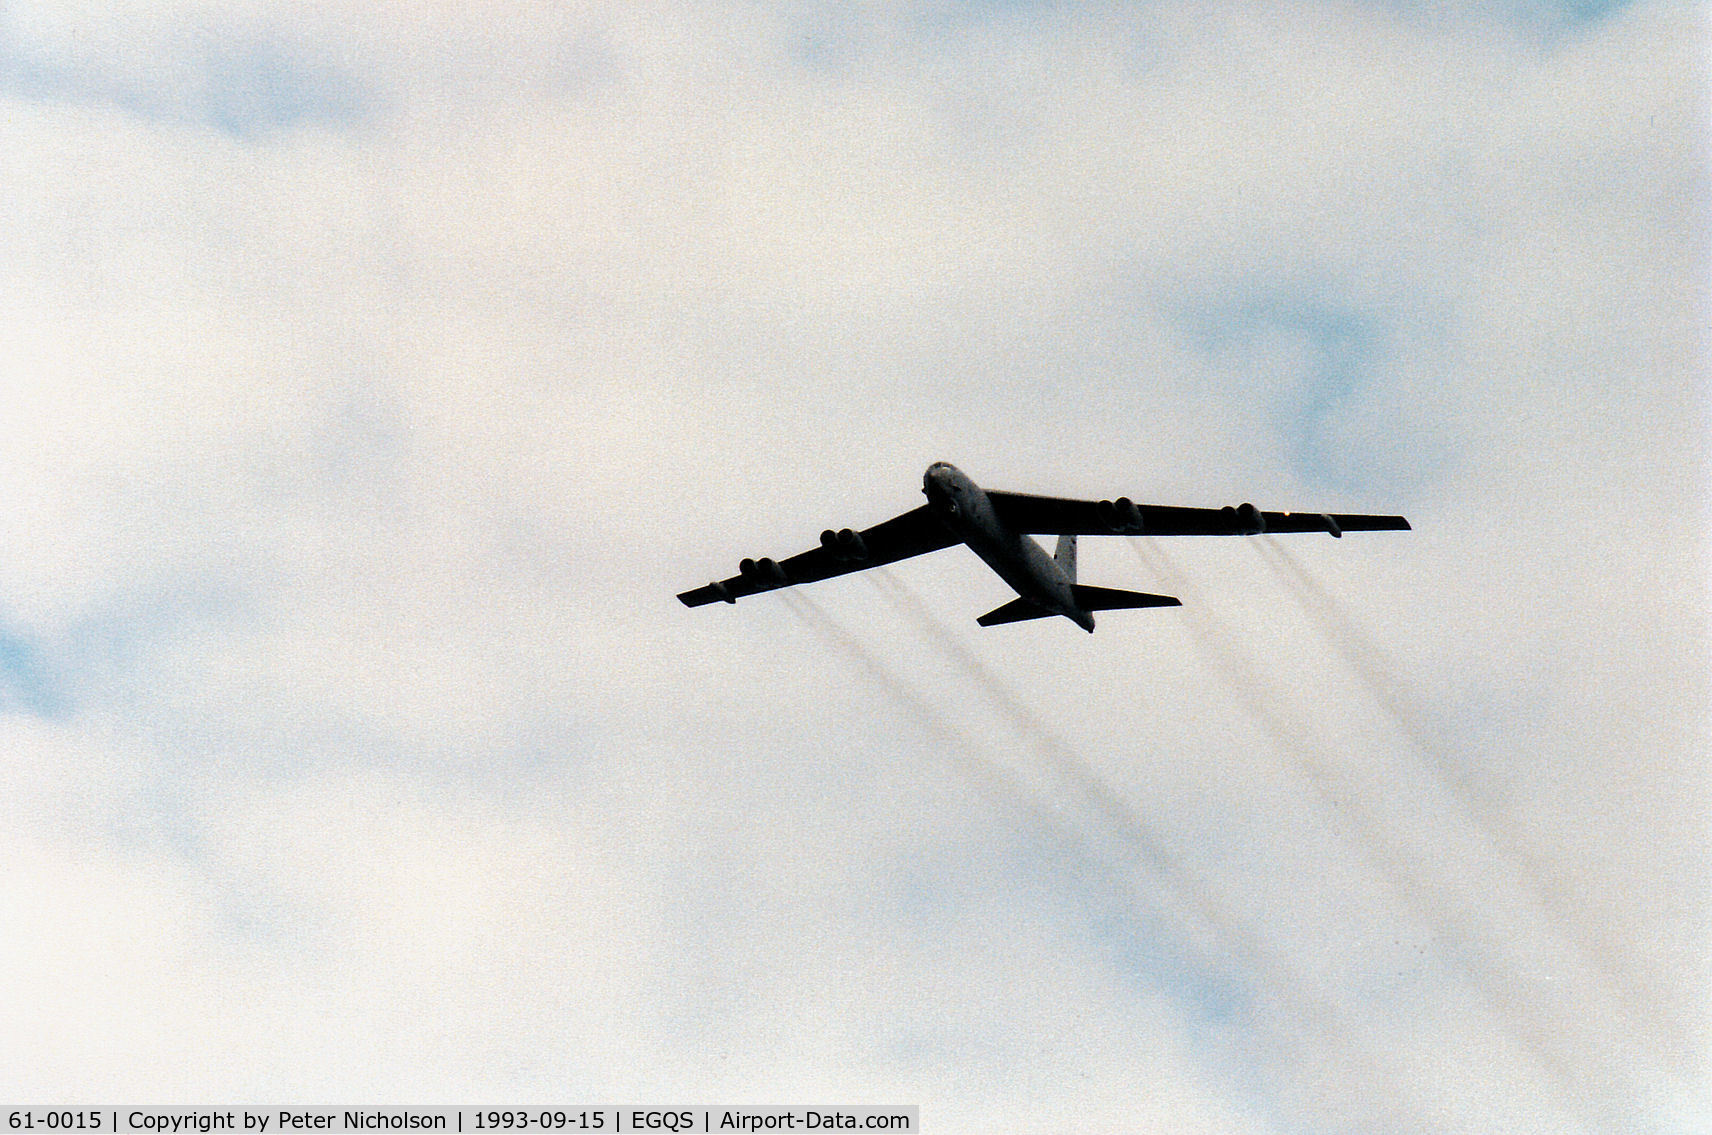 61-0015, 1961 Boeing B-52H Stratofortress C/N 464442, B-52H Stratofortress, callsign Slam 12, of the 416th Bomb Wing at Griffiss AFB over-flying RAF Lossiemouth on an Exercise Solid Stance mission in September 1993.